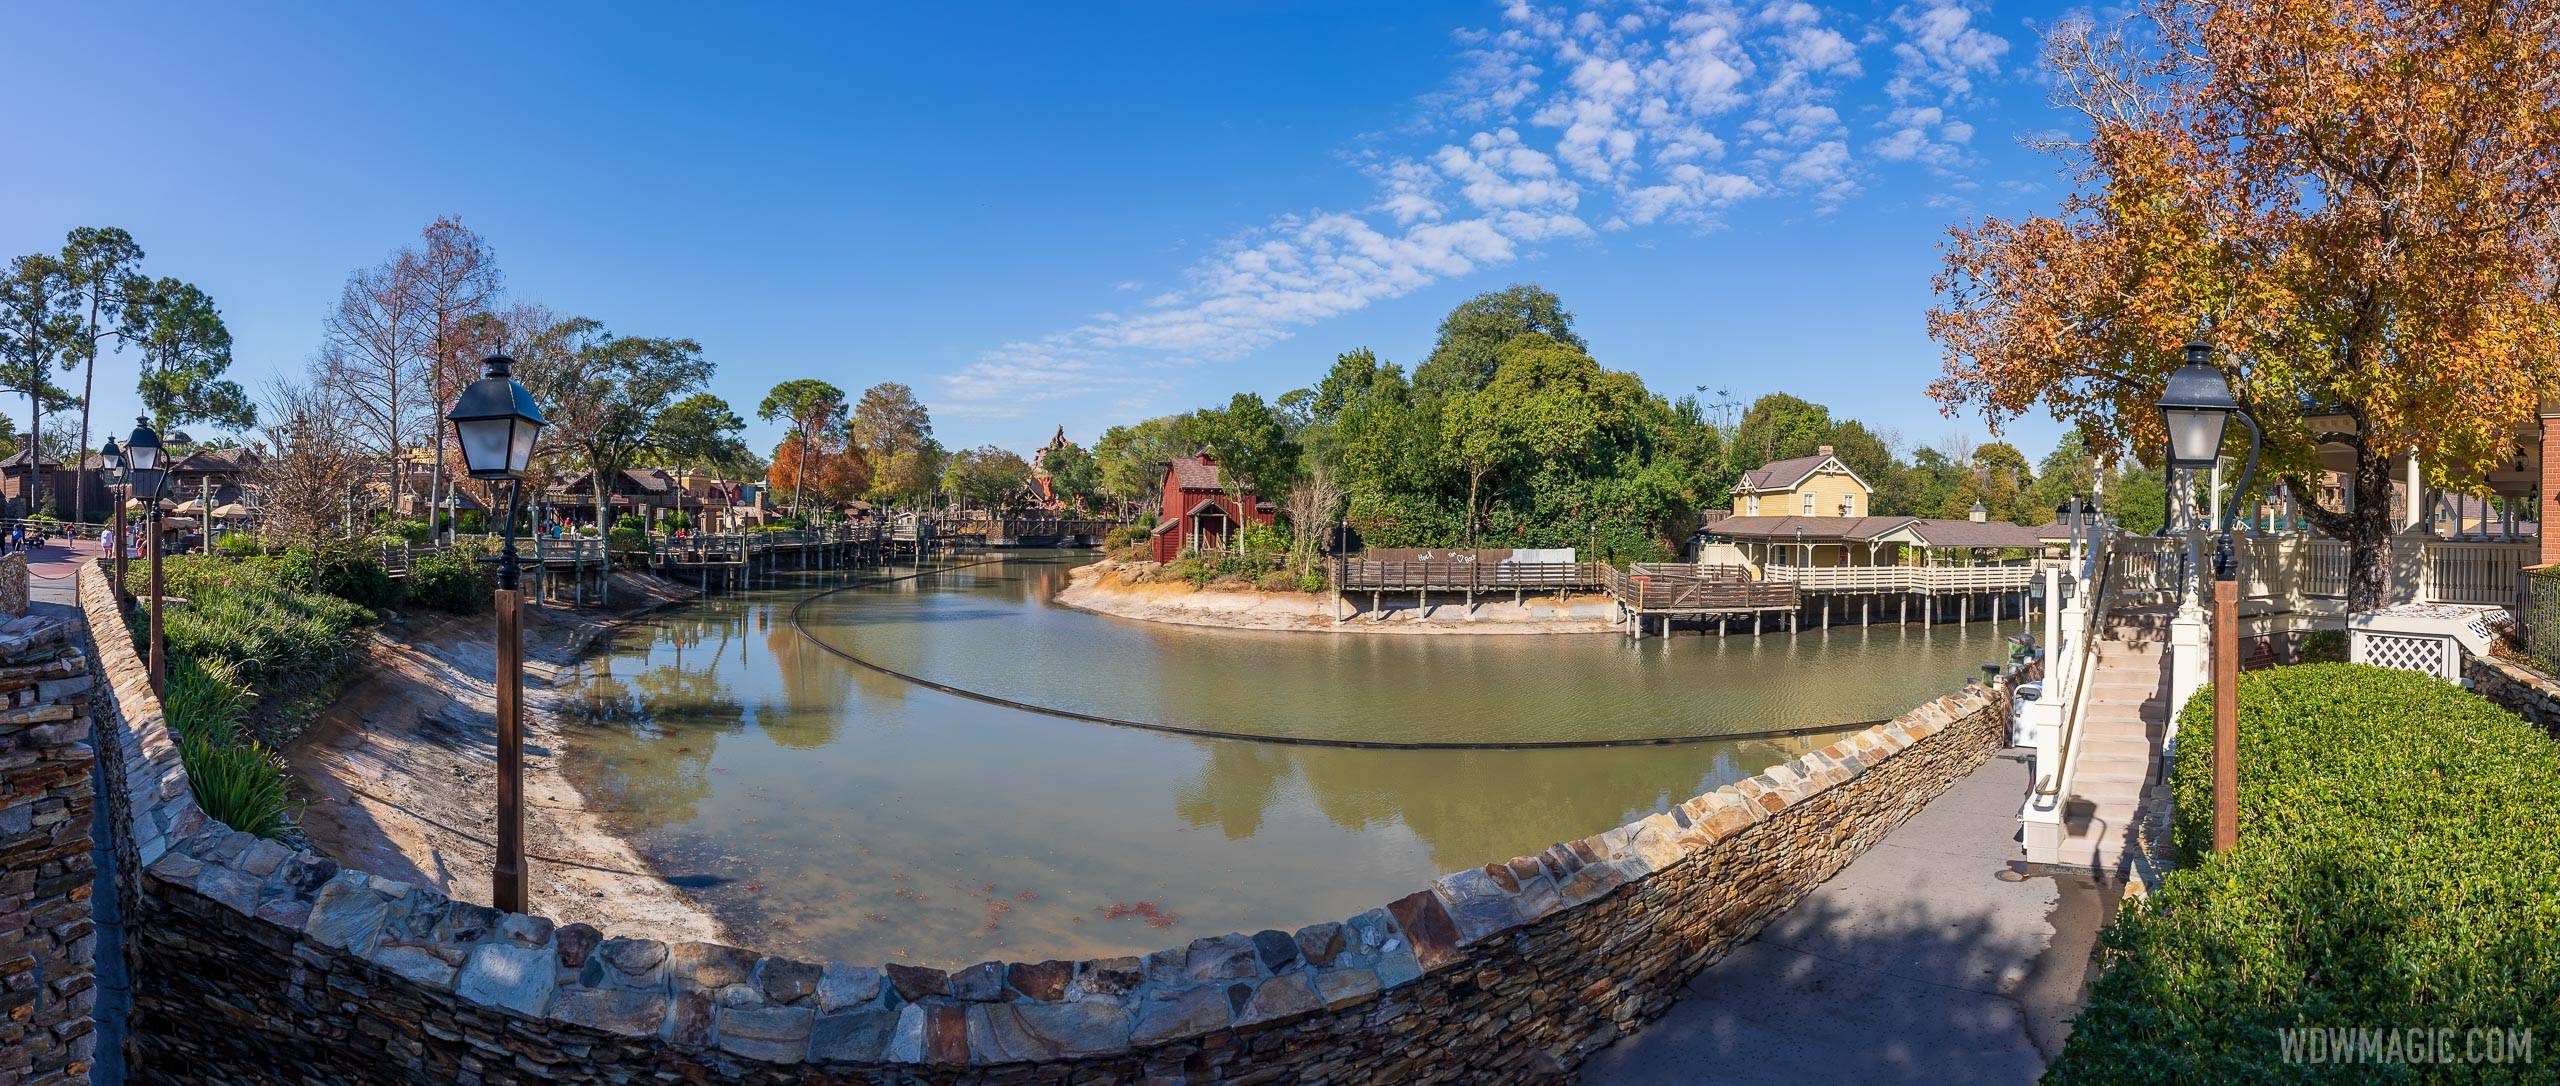 Refilling the Rivers of America has been underway for the last week